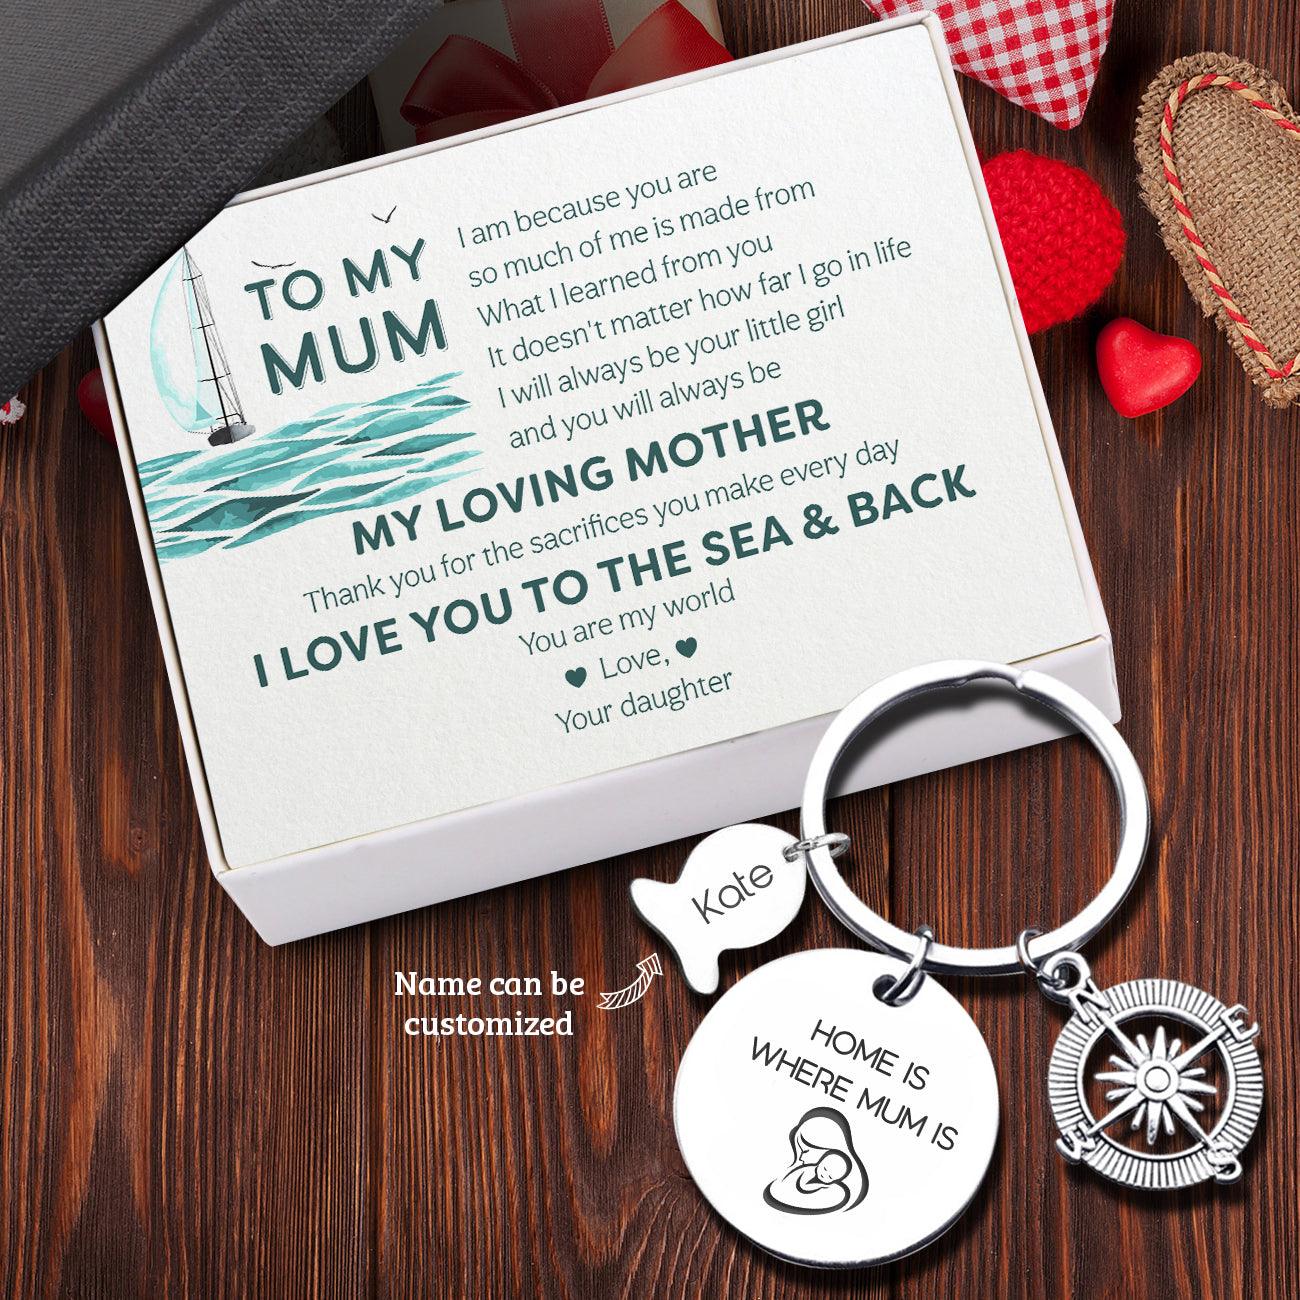 Personalised Fishing Compass Keychain - Fishing - To My Mum - I Love You To The Sea & Back - Augkwb19002 - Gifts Holder